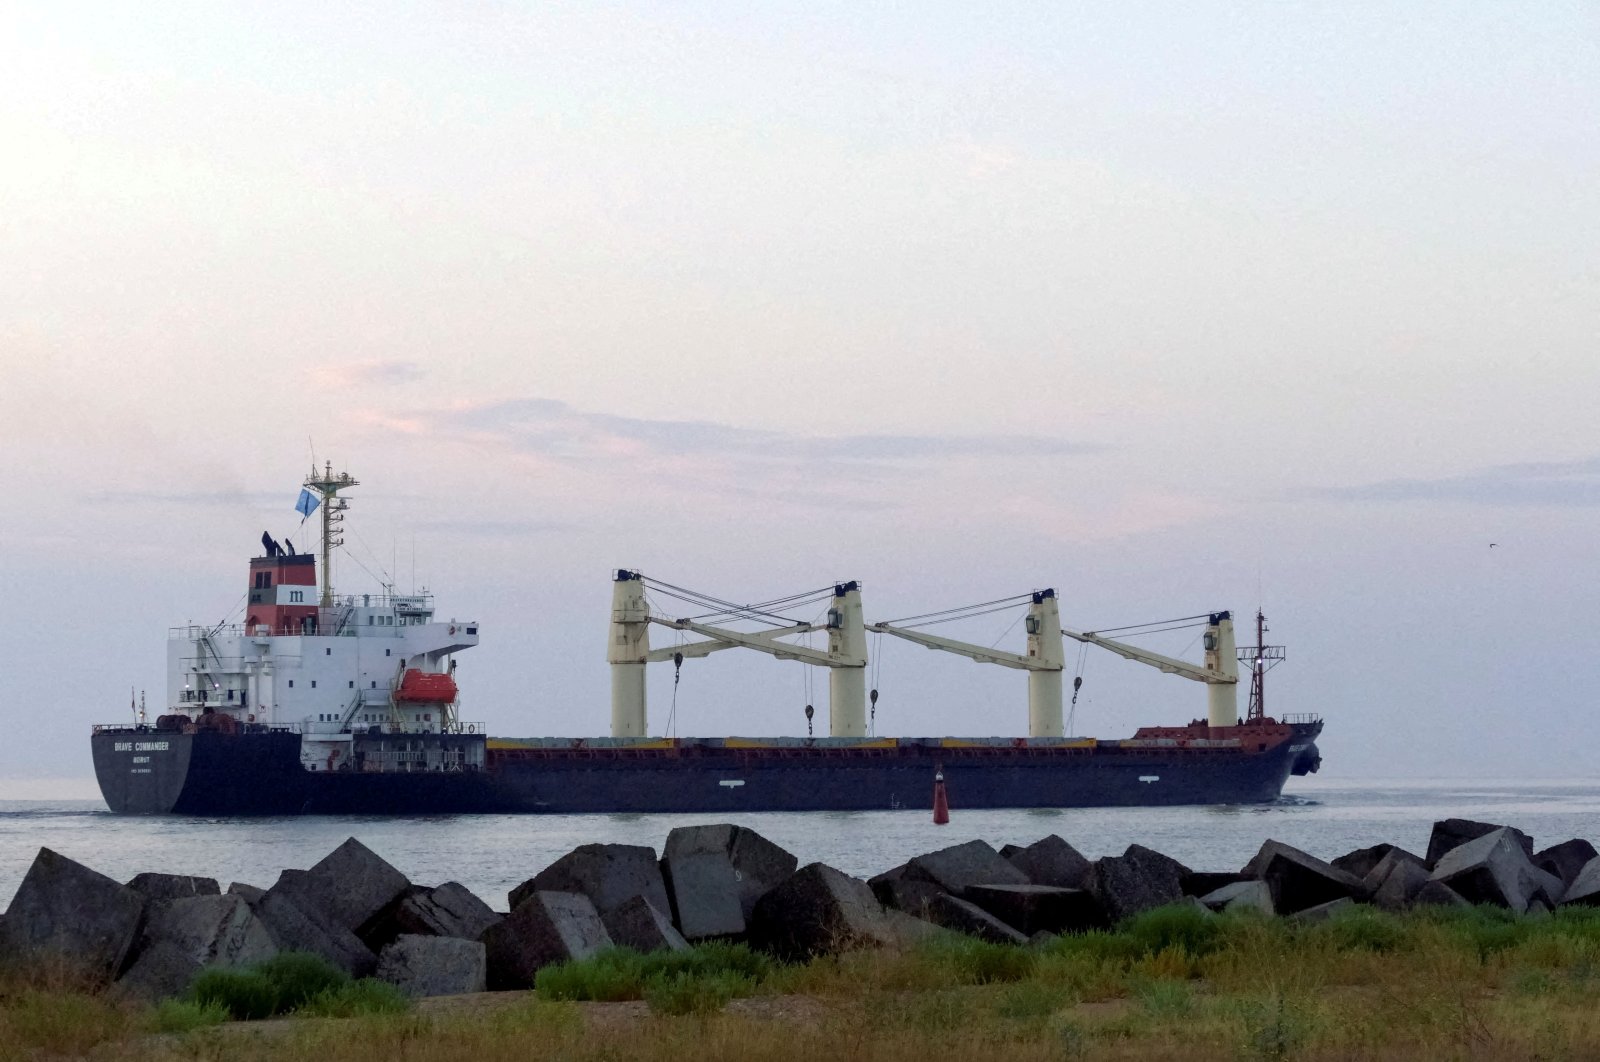 The Lebanese-flagged bulk carrier Brave Commander leaves the seaport of Pivdennyi with wheat after restarting grain export, amid Russia&#039;s attack on Ukraine, in the town of Yuzhne, Odessa region, Ukraine, Aug. 16, 2022. (Reuters Photo)